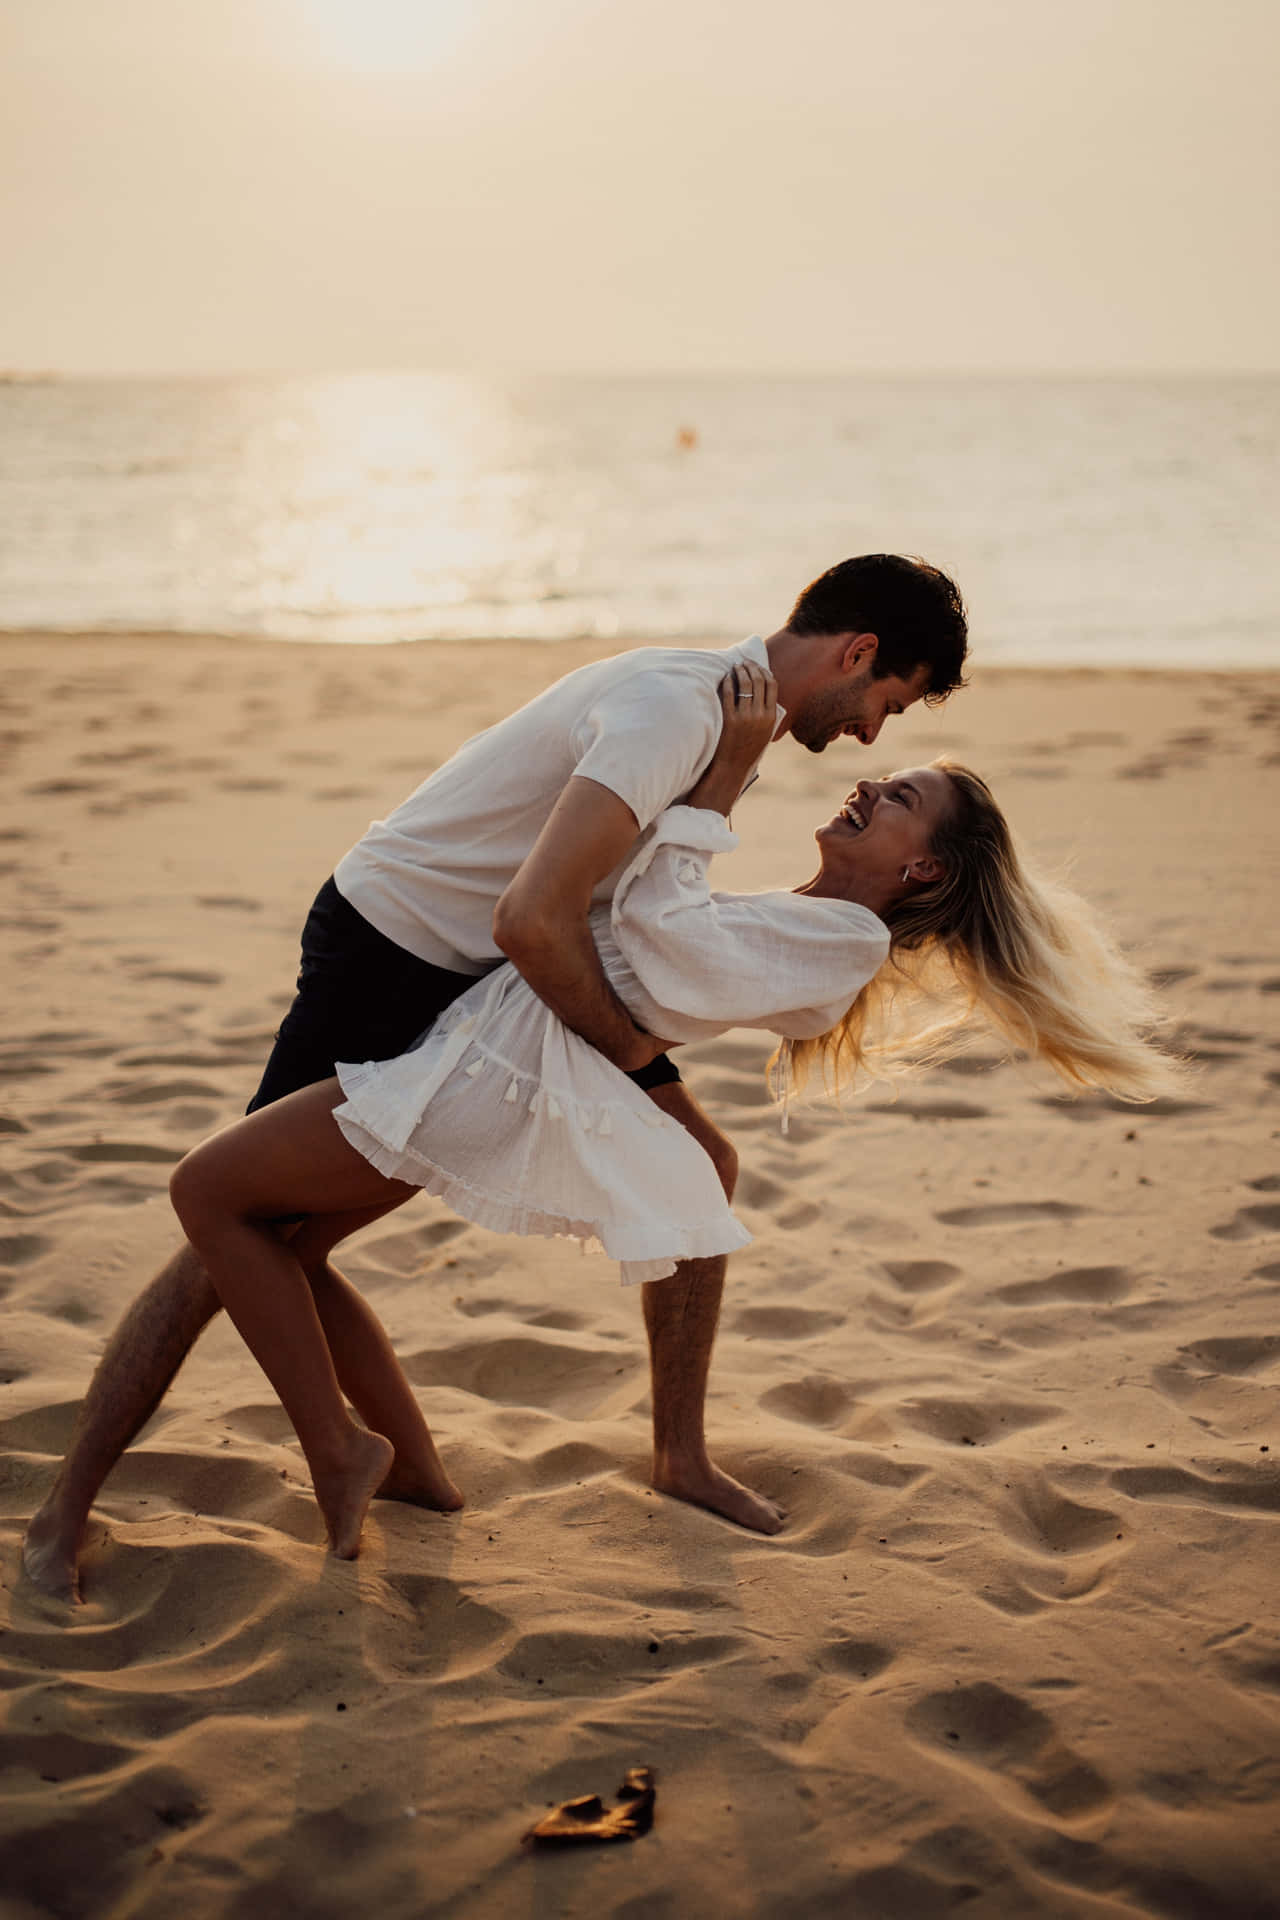 Download Couple At Beach Playful Pose Wallpaper